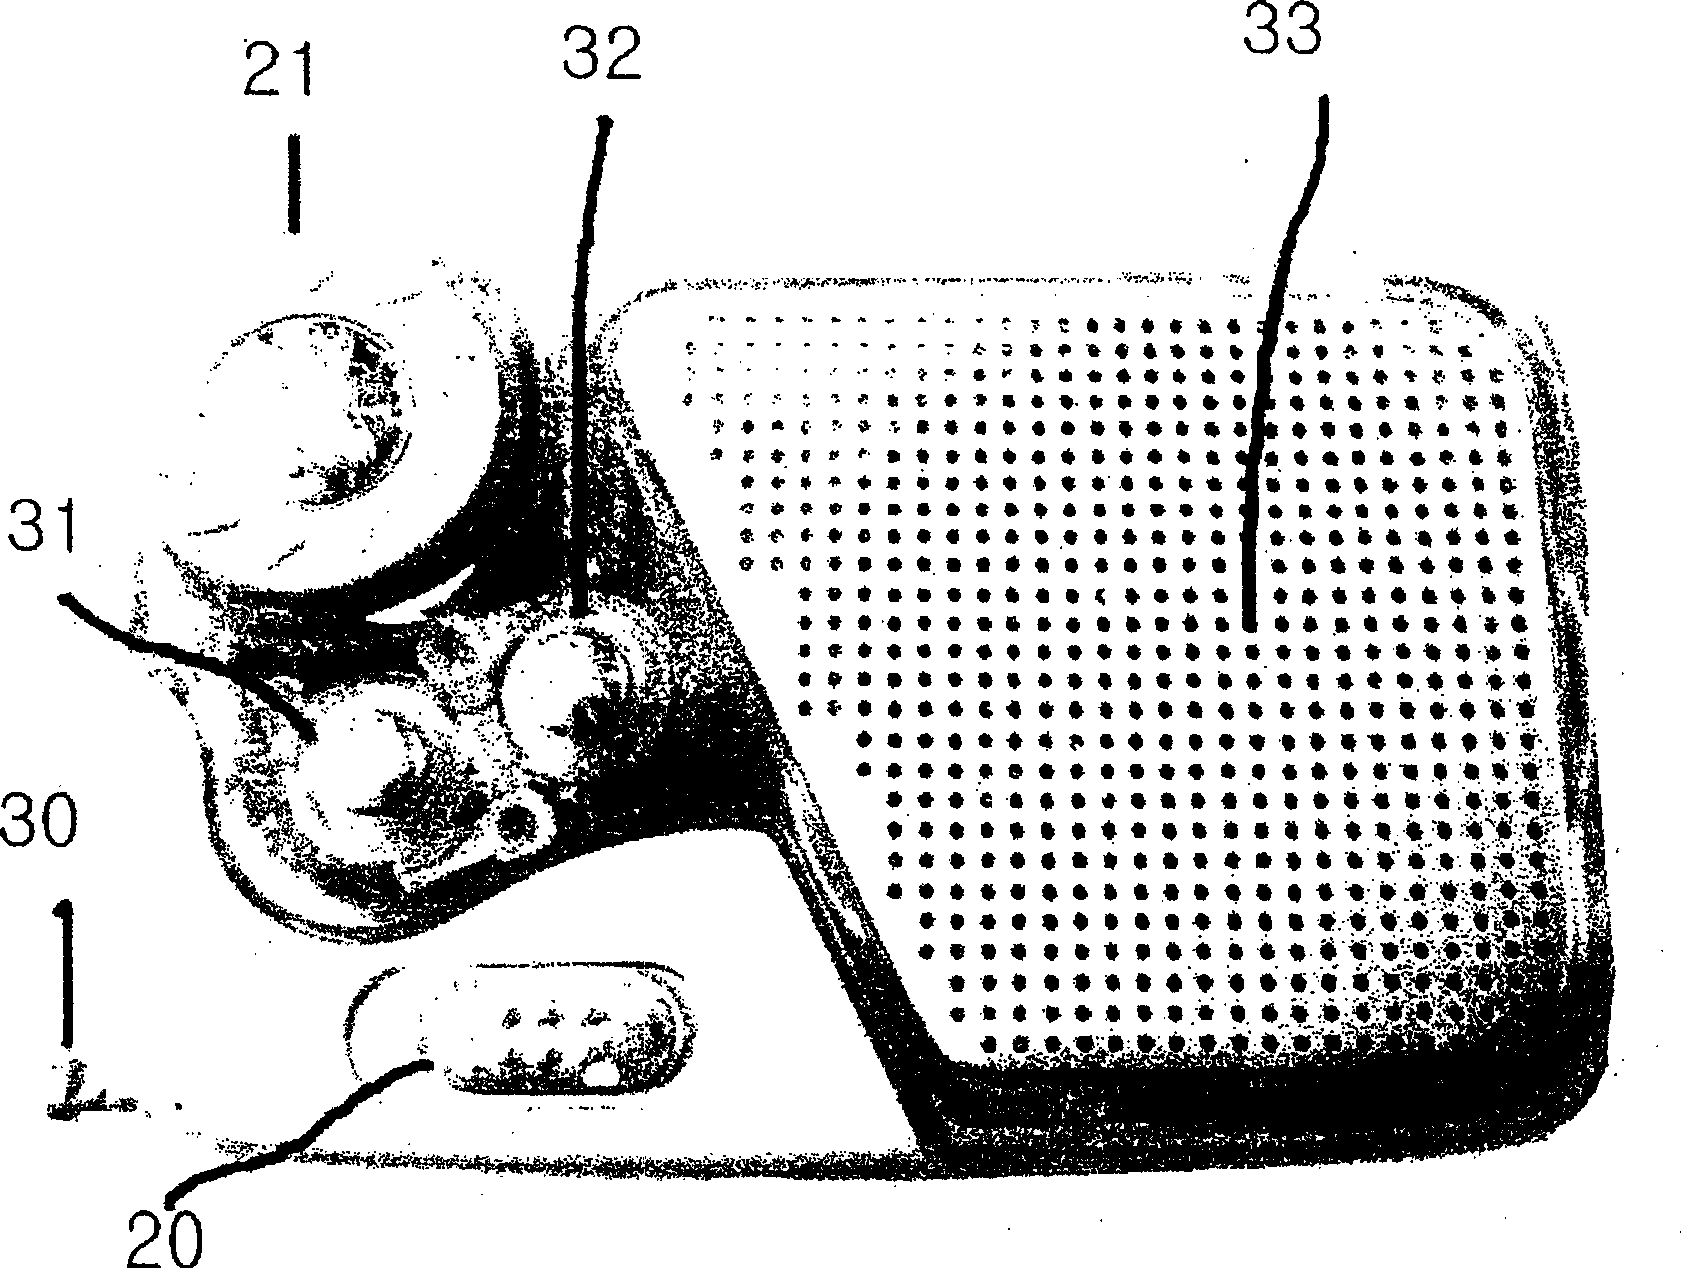 Frequency modulation radio for hearing aid